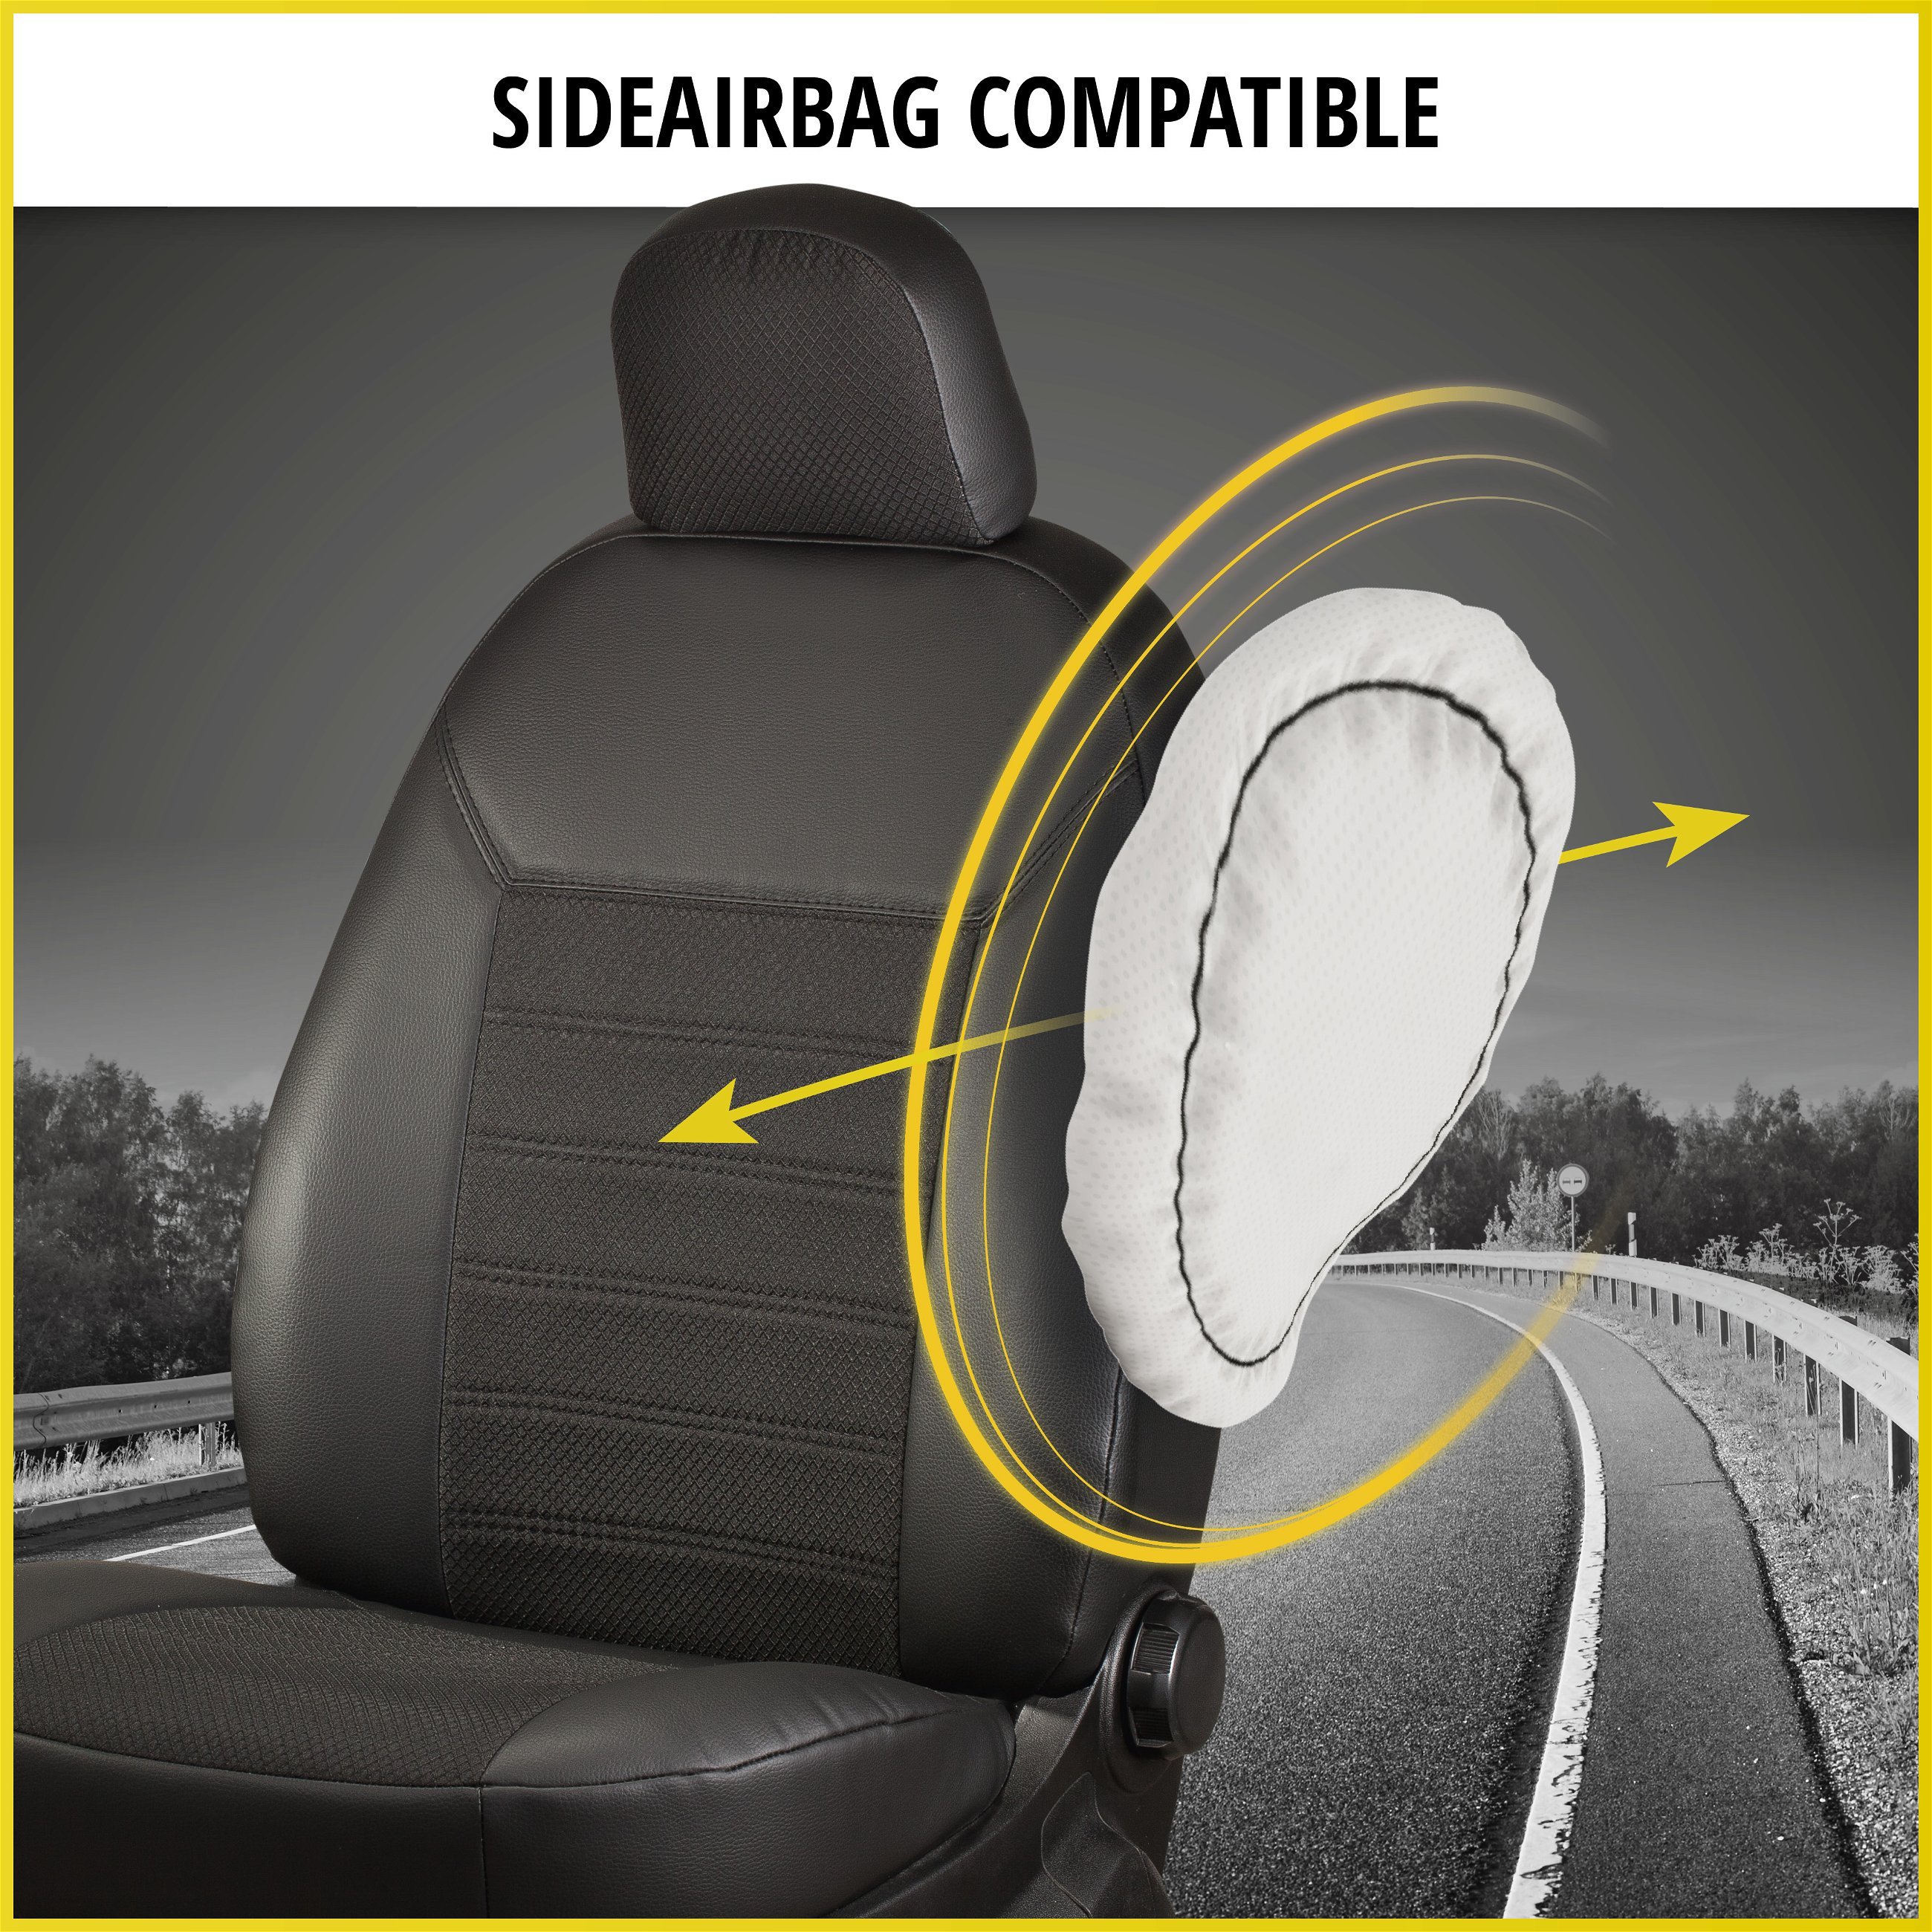 Premium Seat Cover for Mercedes-Benz Sprinter 02/2018-Today, 2 single seat covers front + 1 armrest cover